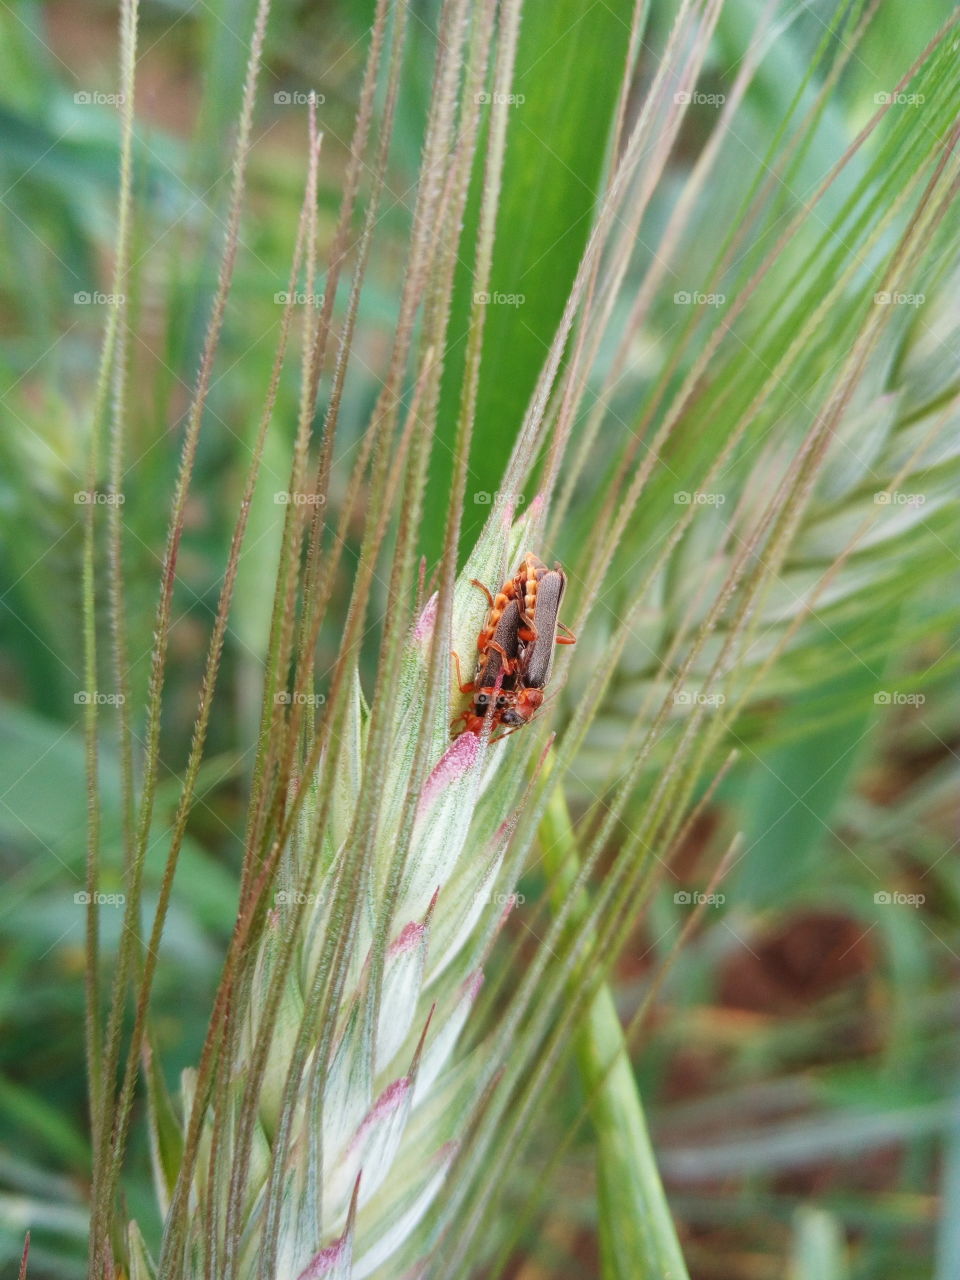 copulation of bugs in wild nature